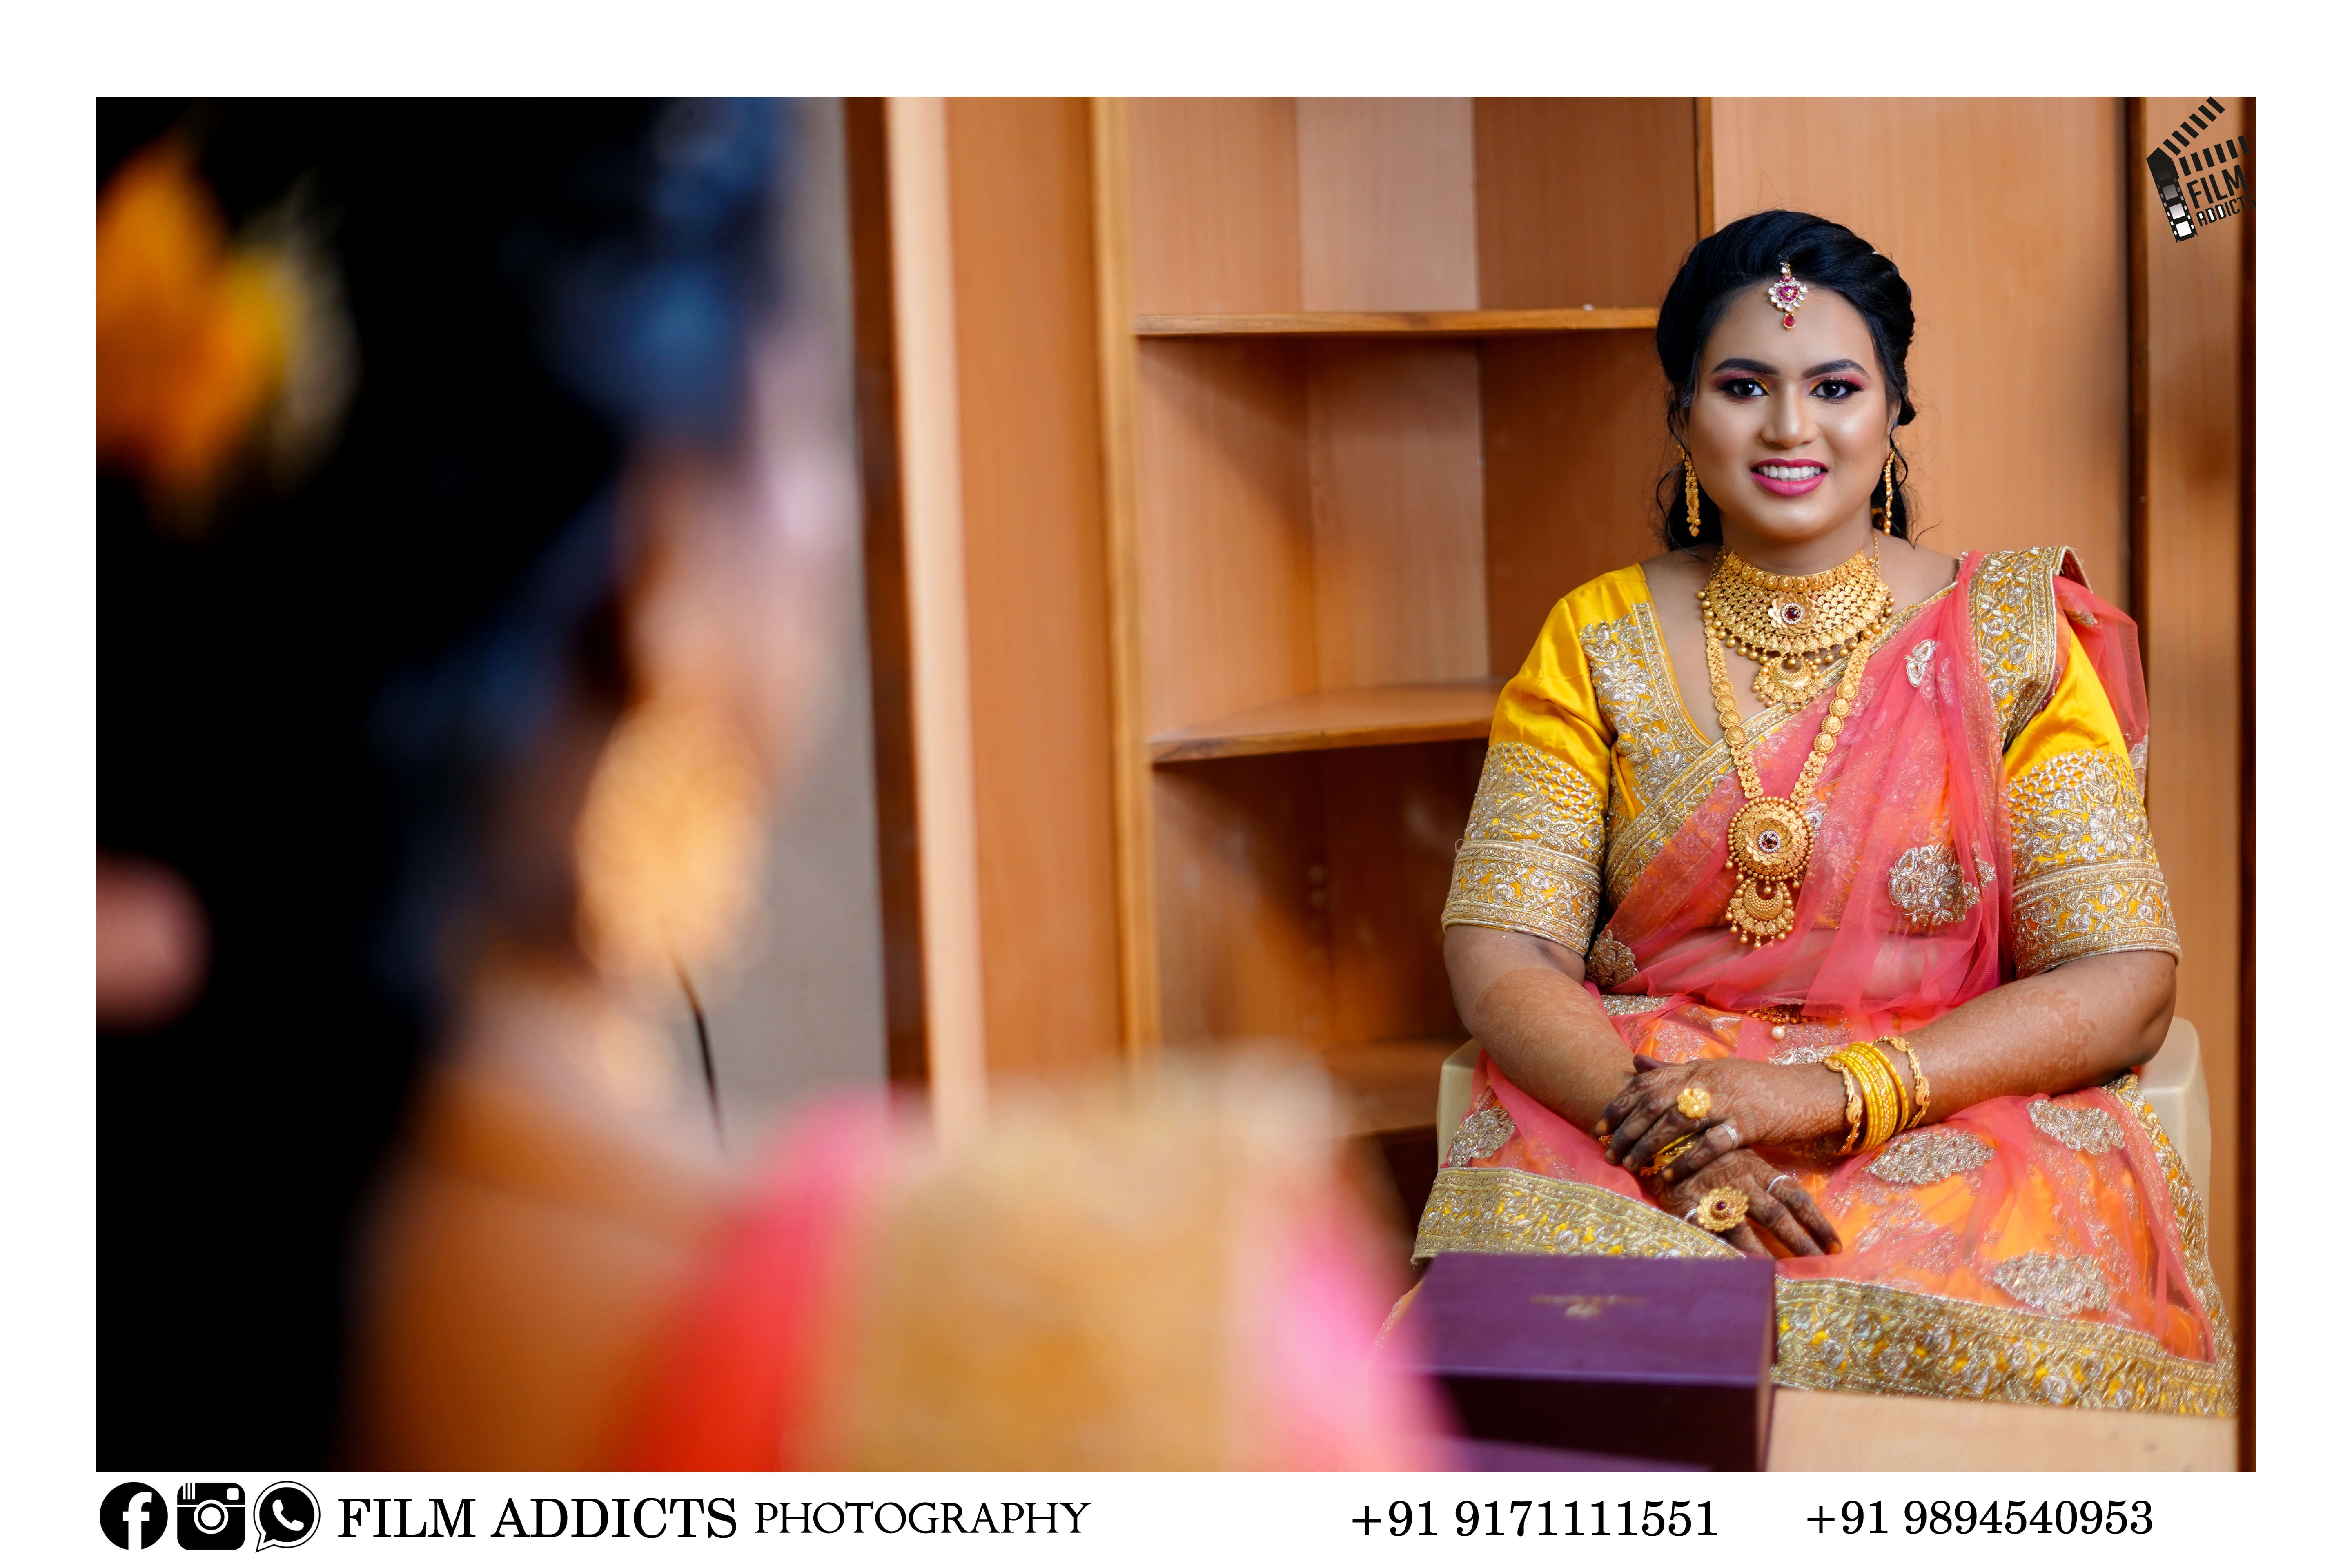 best-candid-photographers-in-Sivakasi,Candid-photography-in-Sivakasi,best-wedding -photography-in-Sivakasi,Best-candid-photography-in-Sivakasi,Best-candid-photographer,candid-photographer-in-Sivakasi,drone-photographer-in-Sivakasi,helicam-photographer-in-Sivakasi,candid-wedding-photographers-in-Sivakasi,photographers-in-Sivakasi,professional-wedding-photographers-in-Sivakasi,top-wedding-filmmakers-in-Sivakasi,wedding-cinematographers-in-Sivakasi,wedding-cinimatography-in-Sivakasi,wedding-photographers-in-Sivakasi,wedding-teaser-in-Sivakasi,asian-wedding-photography-in-Sivakasi,best-candid-photographers-in-Sivakasi,best-candid-videographers-in-Sivakasi,best-photographers-in-Sivakasi,best-wedding-photographers-in-Sivakasi,best-nadar-wedding-photography-in-Sivakasi,candid-photographers-in-Sivakasi,destination-wedding-photographers-in-Sivakasi,fashion-photographers-in-Sivakasi, Sivakasi-famous-stage-decorations